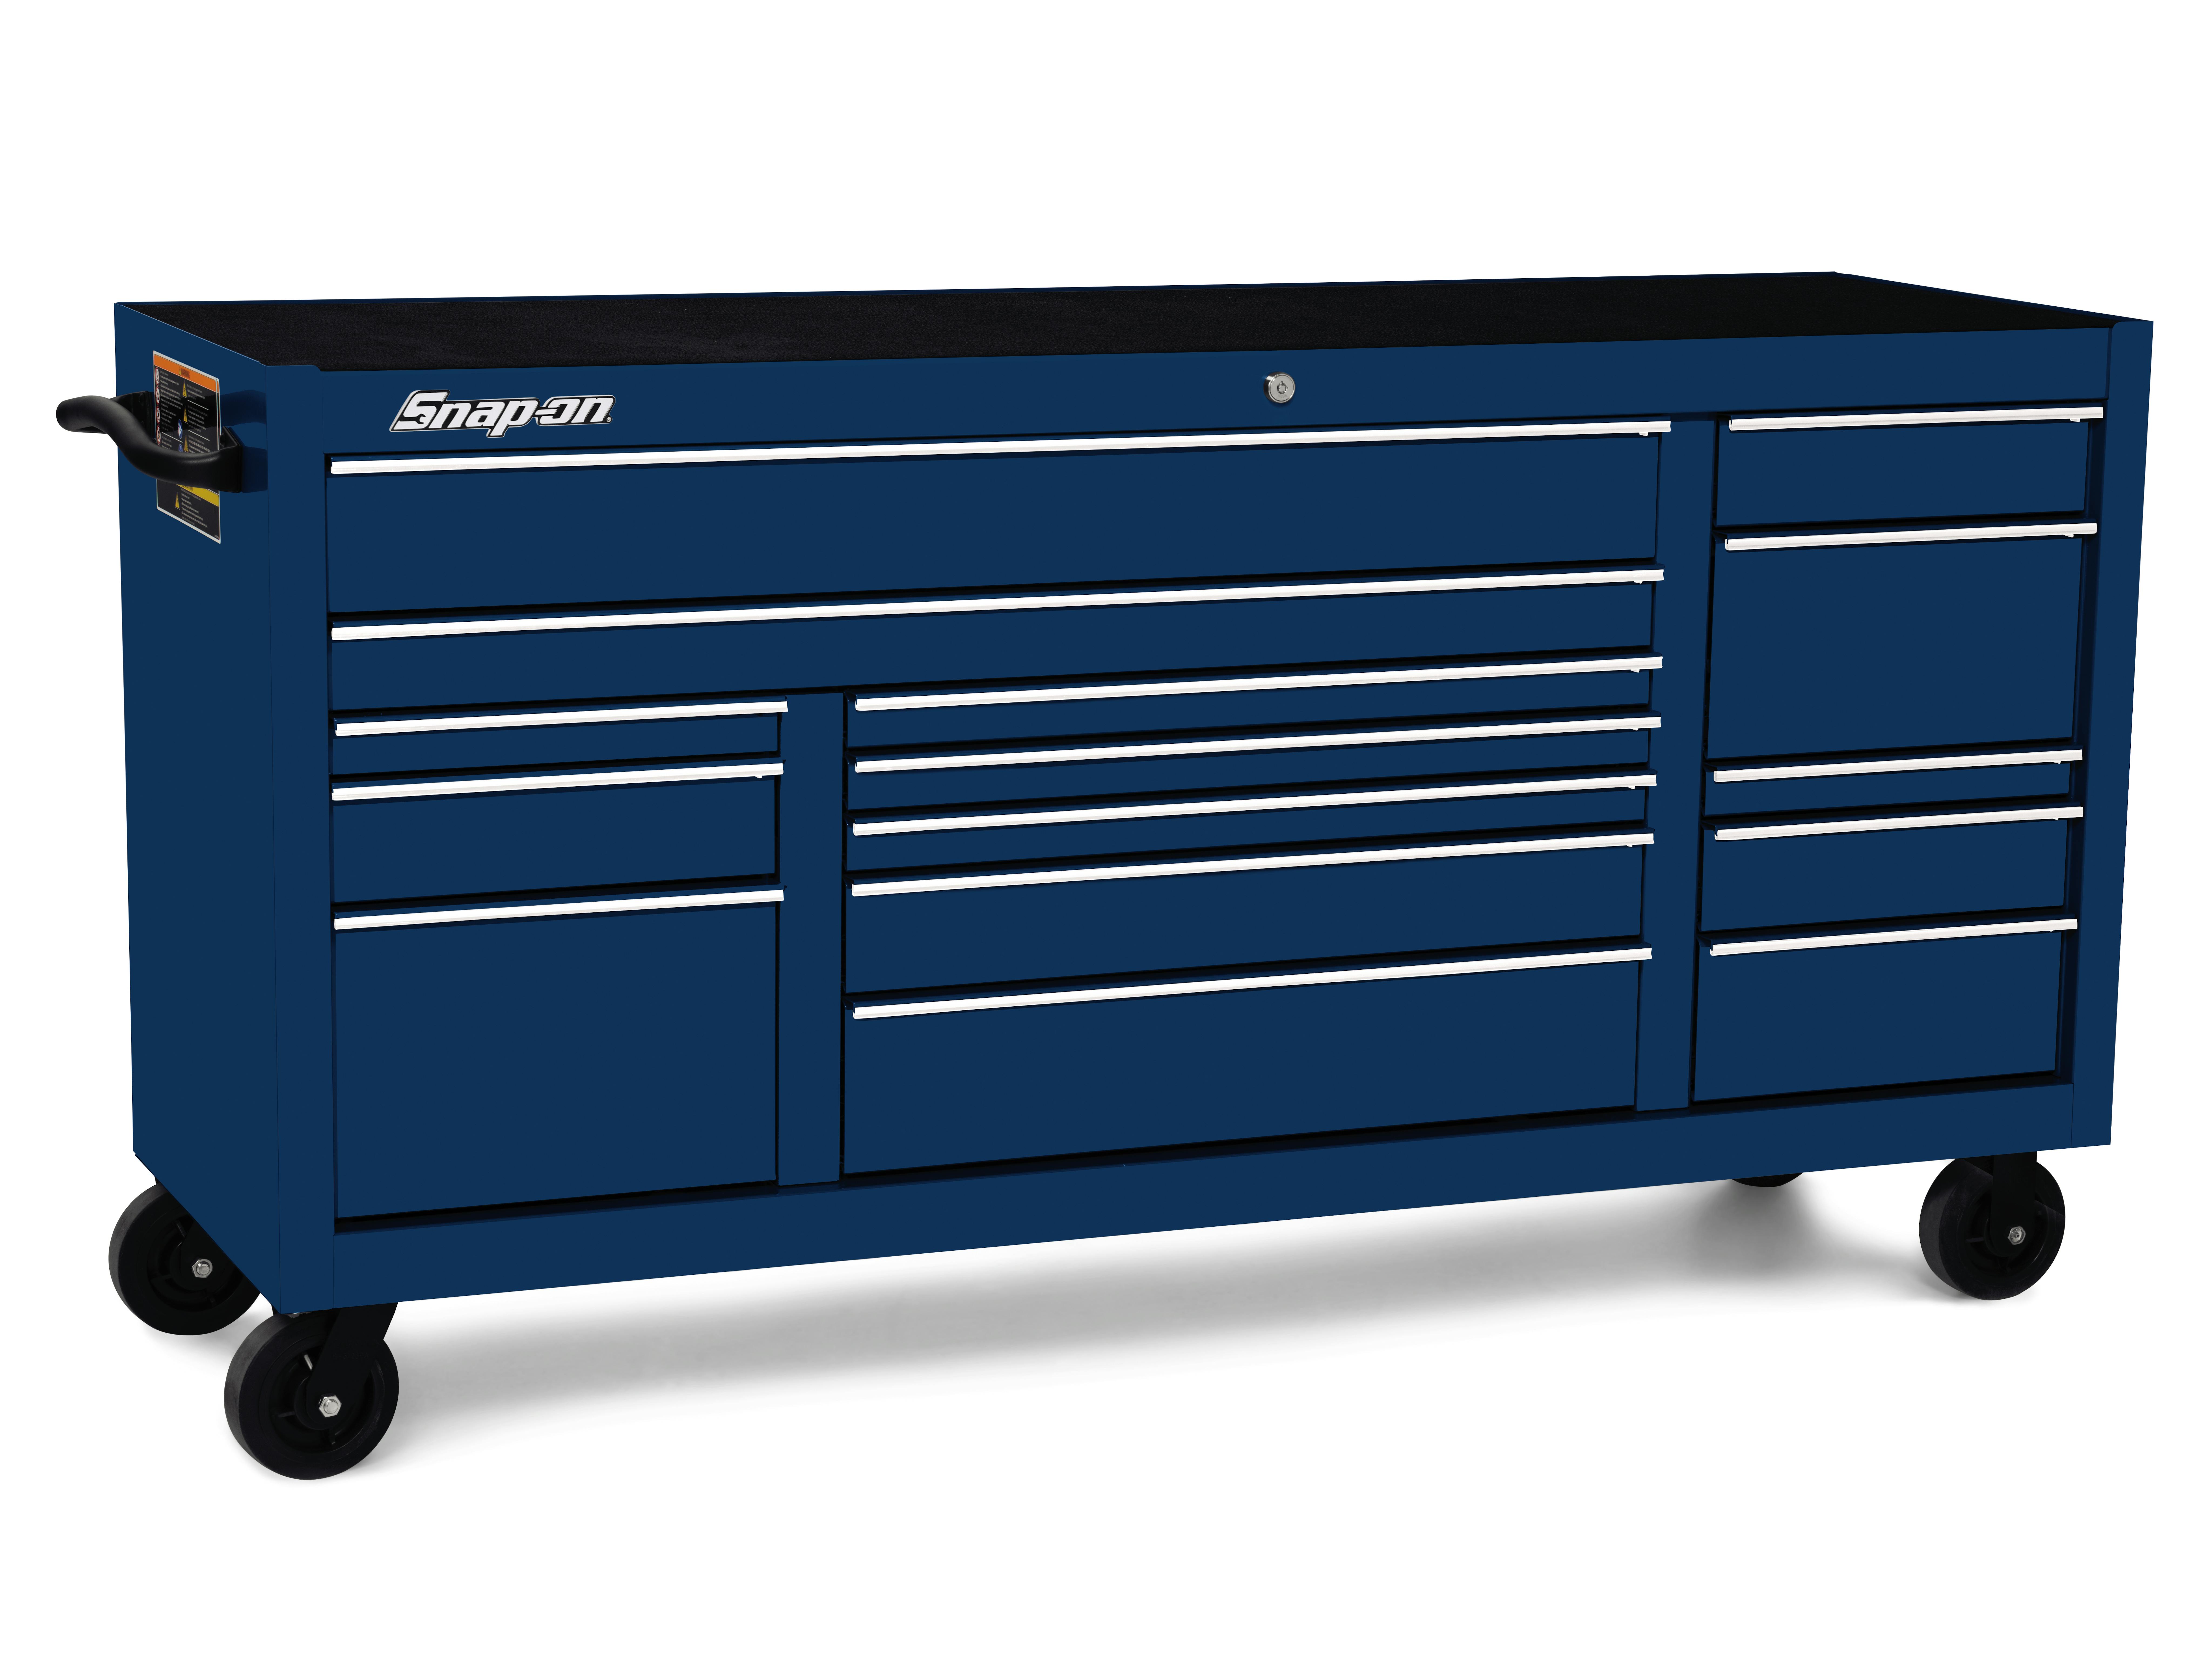 73 15-Drawer Triple-Bank Classic Series Roll Cab with Power